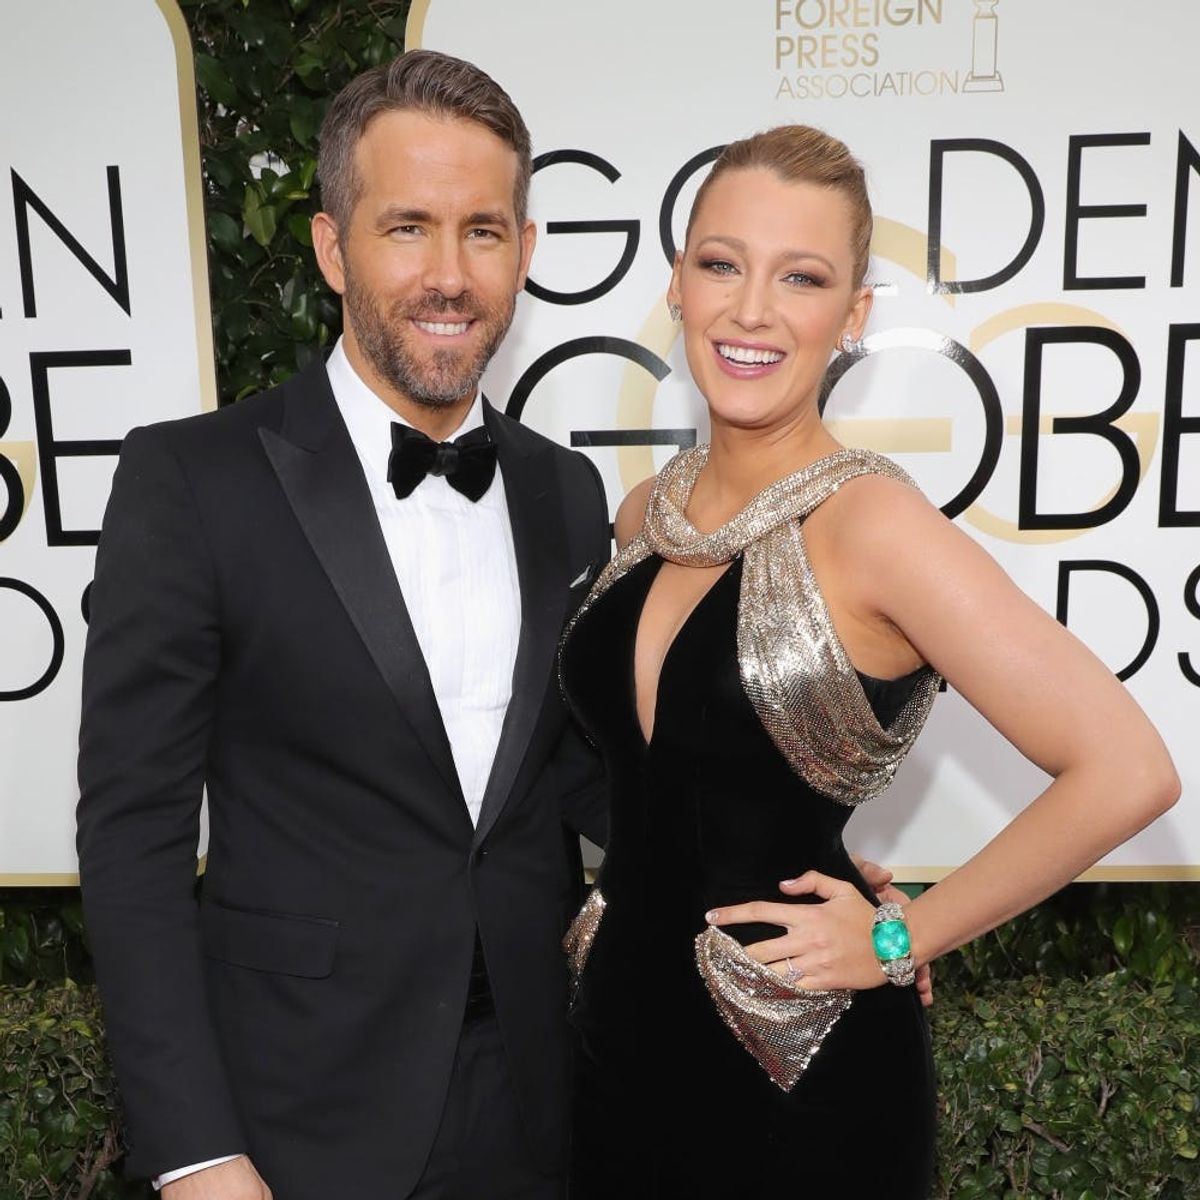 Blake Lively and Ryan Reynolds’ Valentine’s Day Plans May Surprise You